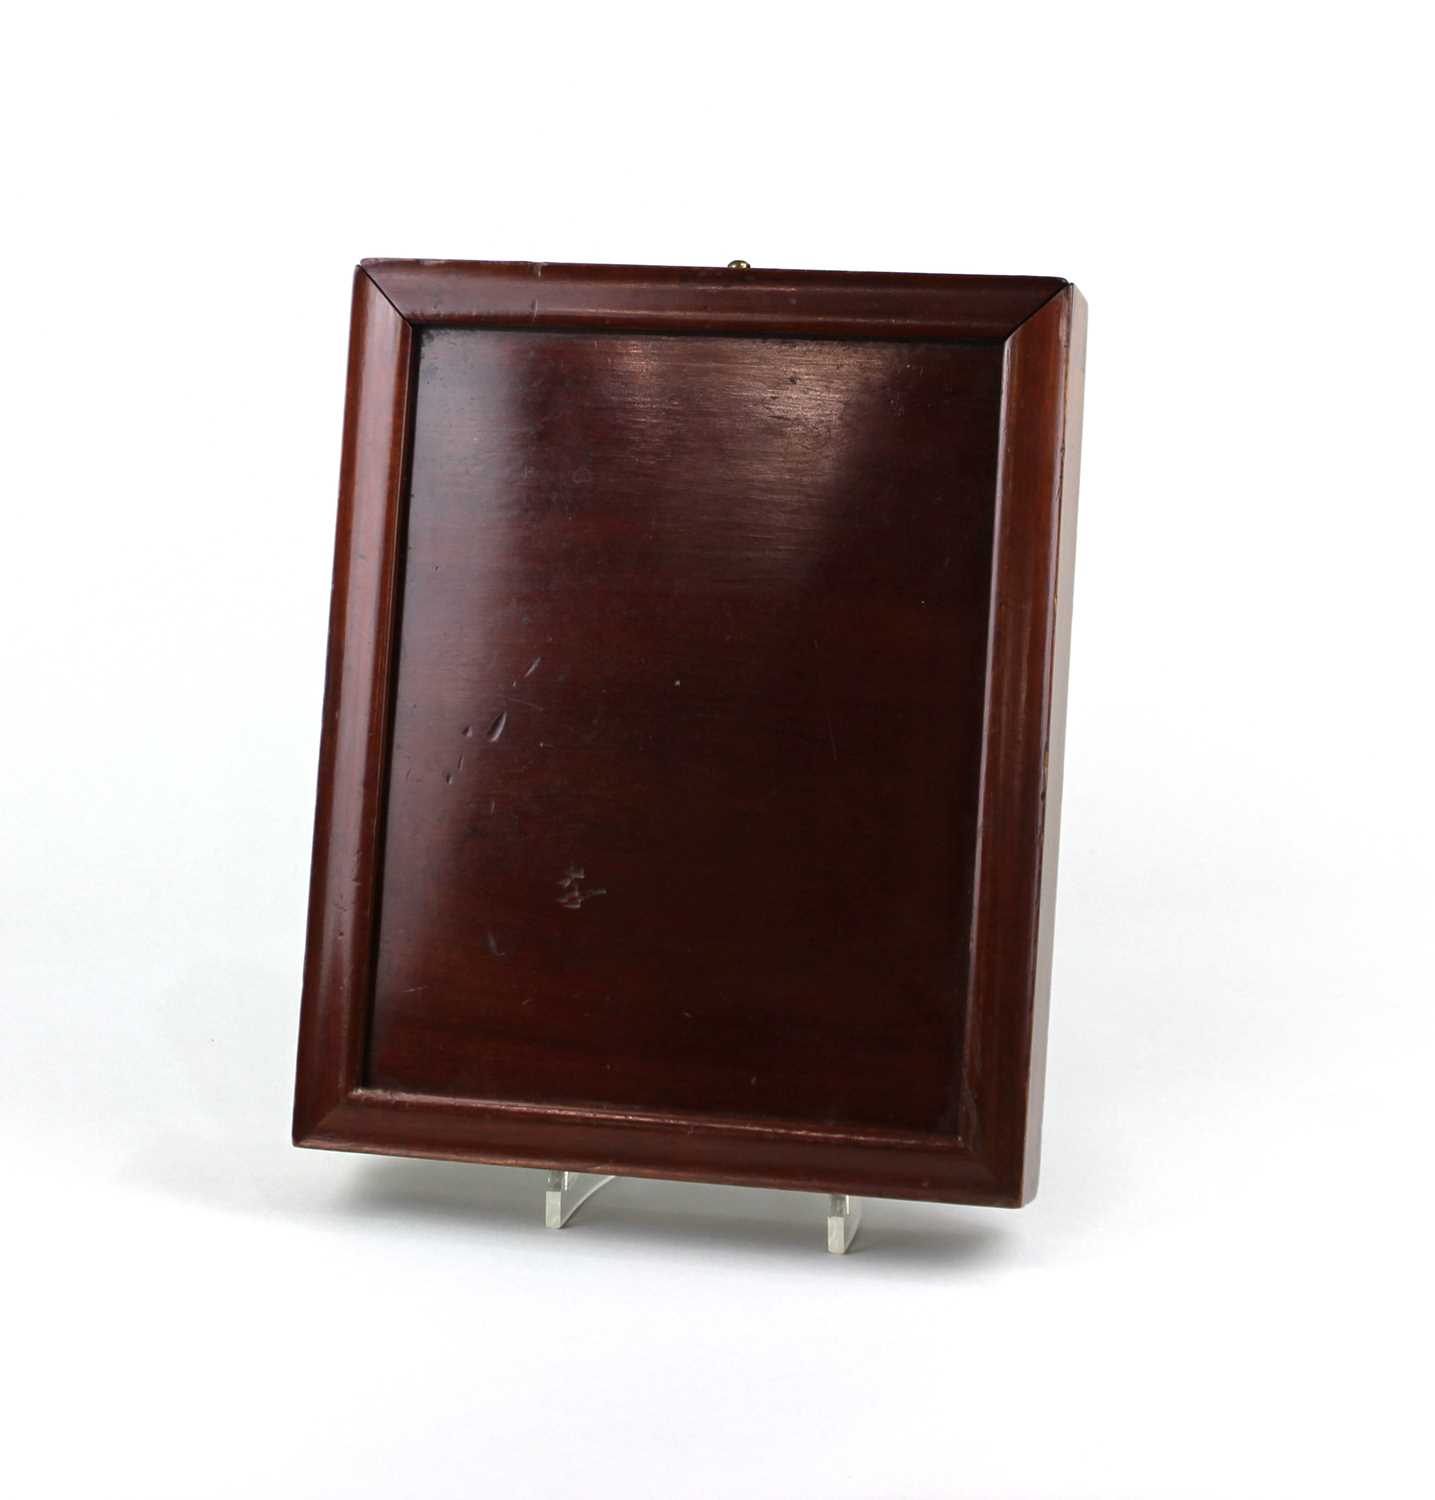 A 19th century mahogany campaign mirror with slide out cover, rear stand and brass hanging loop